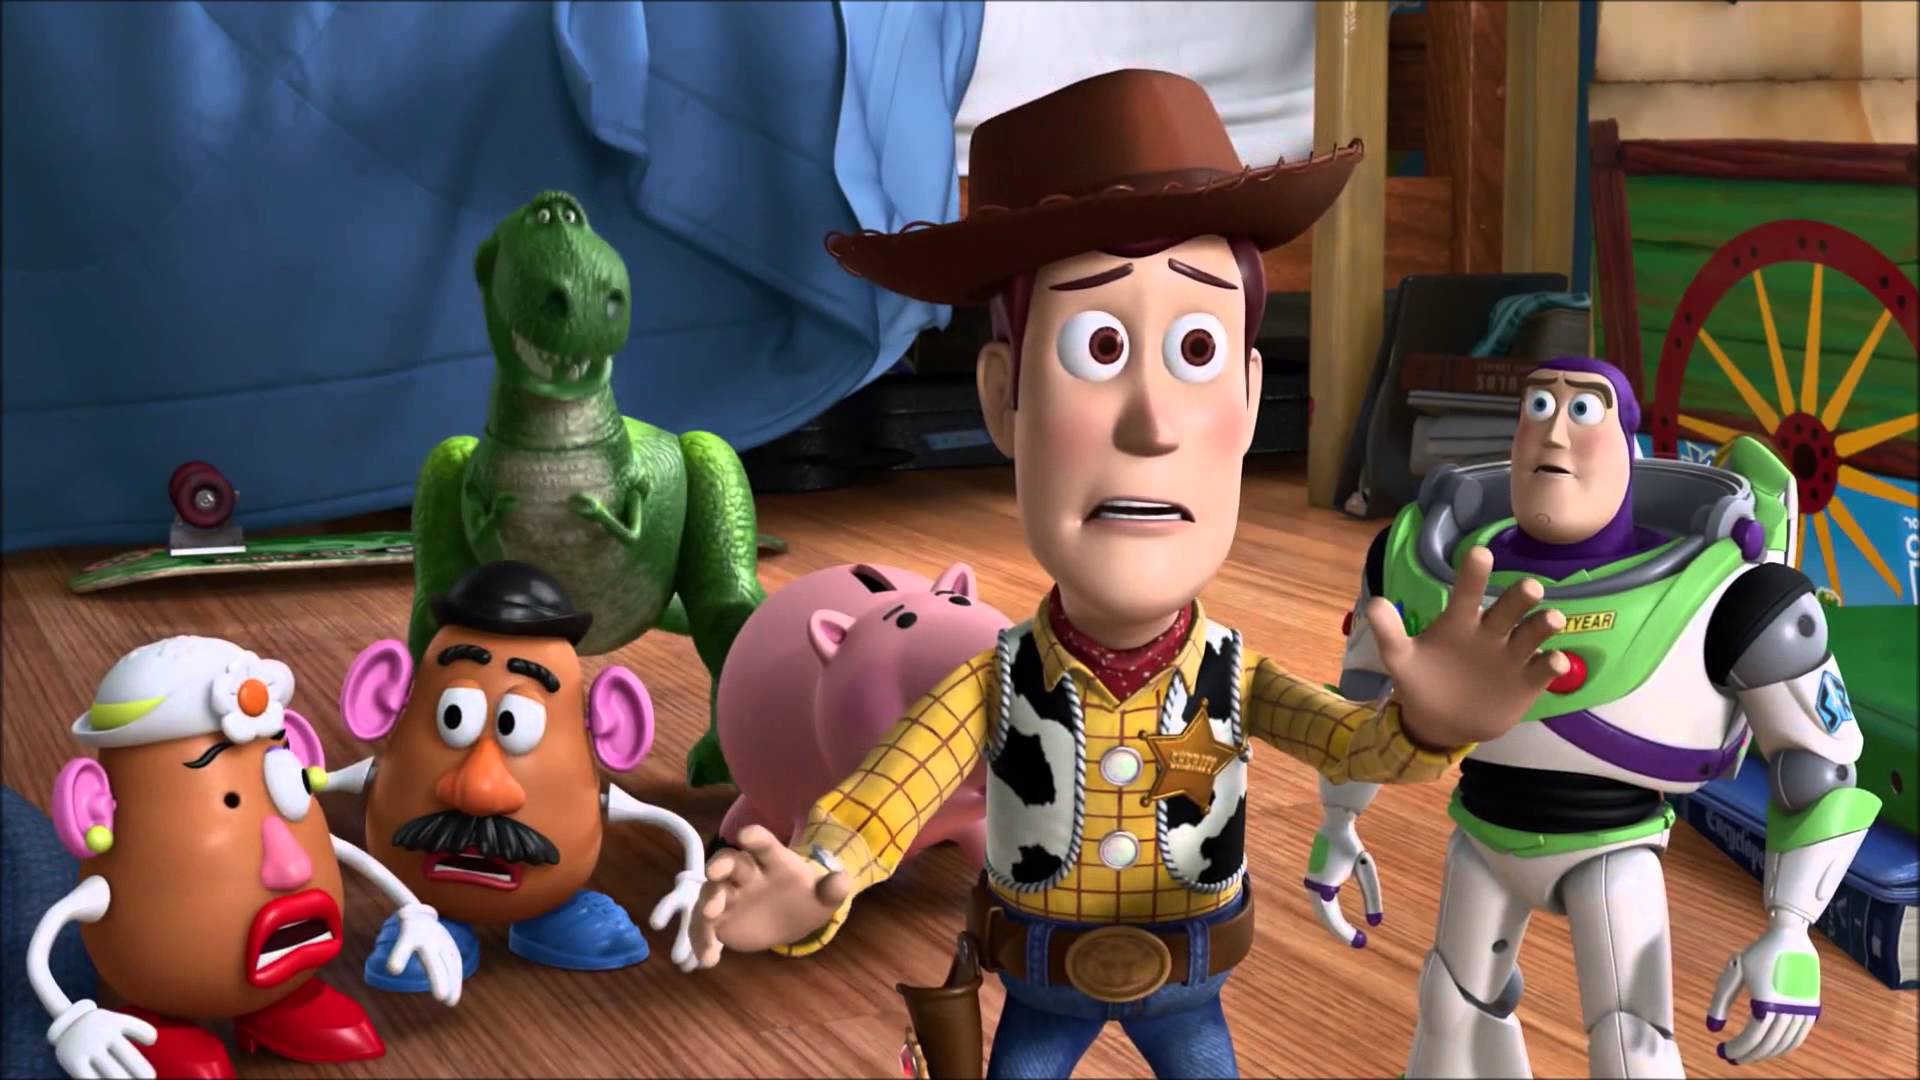 Toy Story 3 wallpaper, Movie, HQ Toy Story 3 pictureK Wallpaper